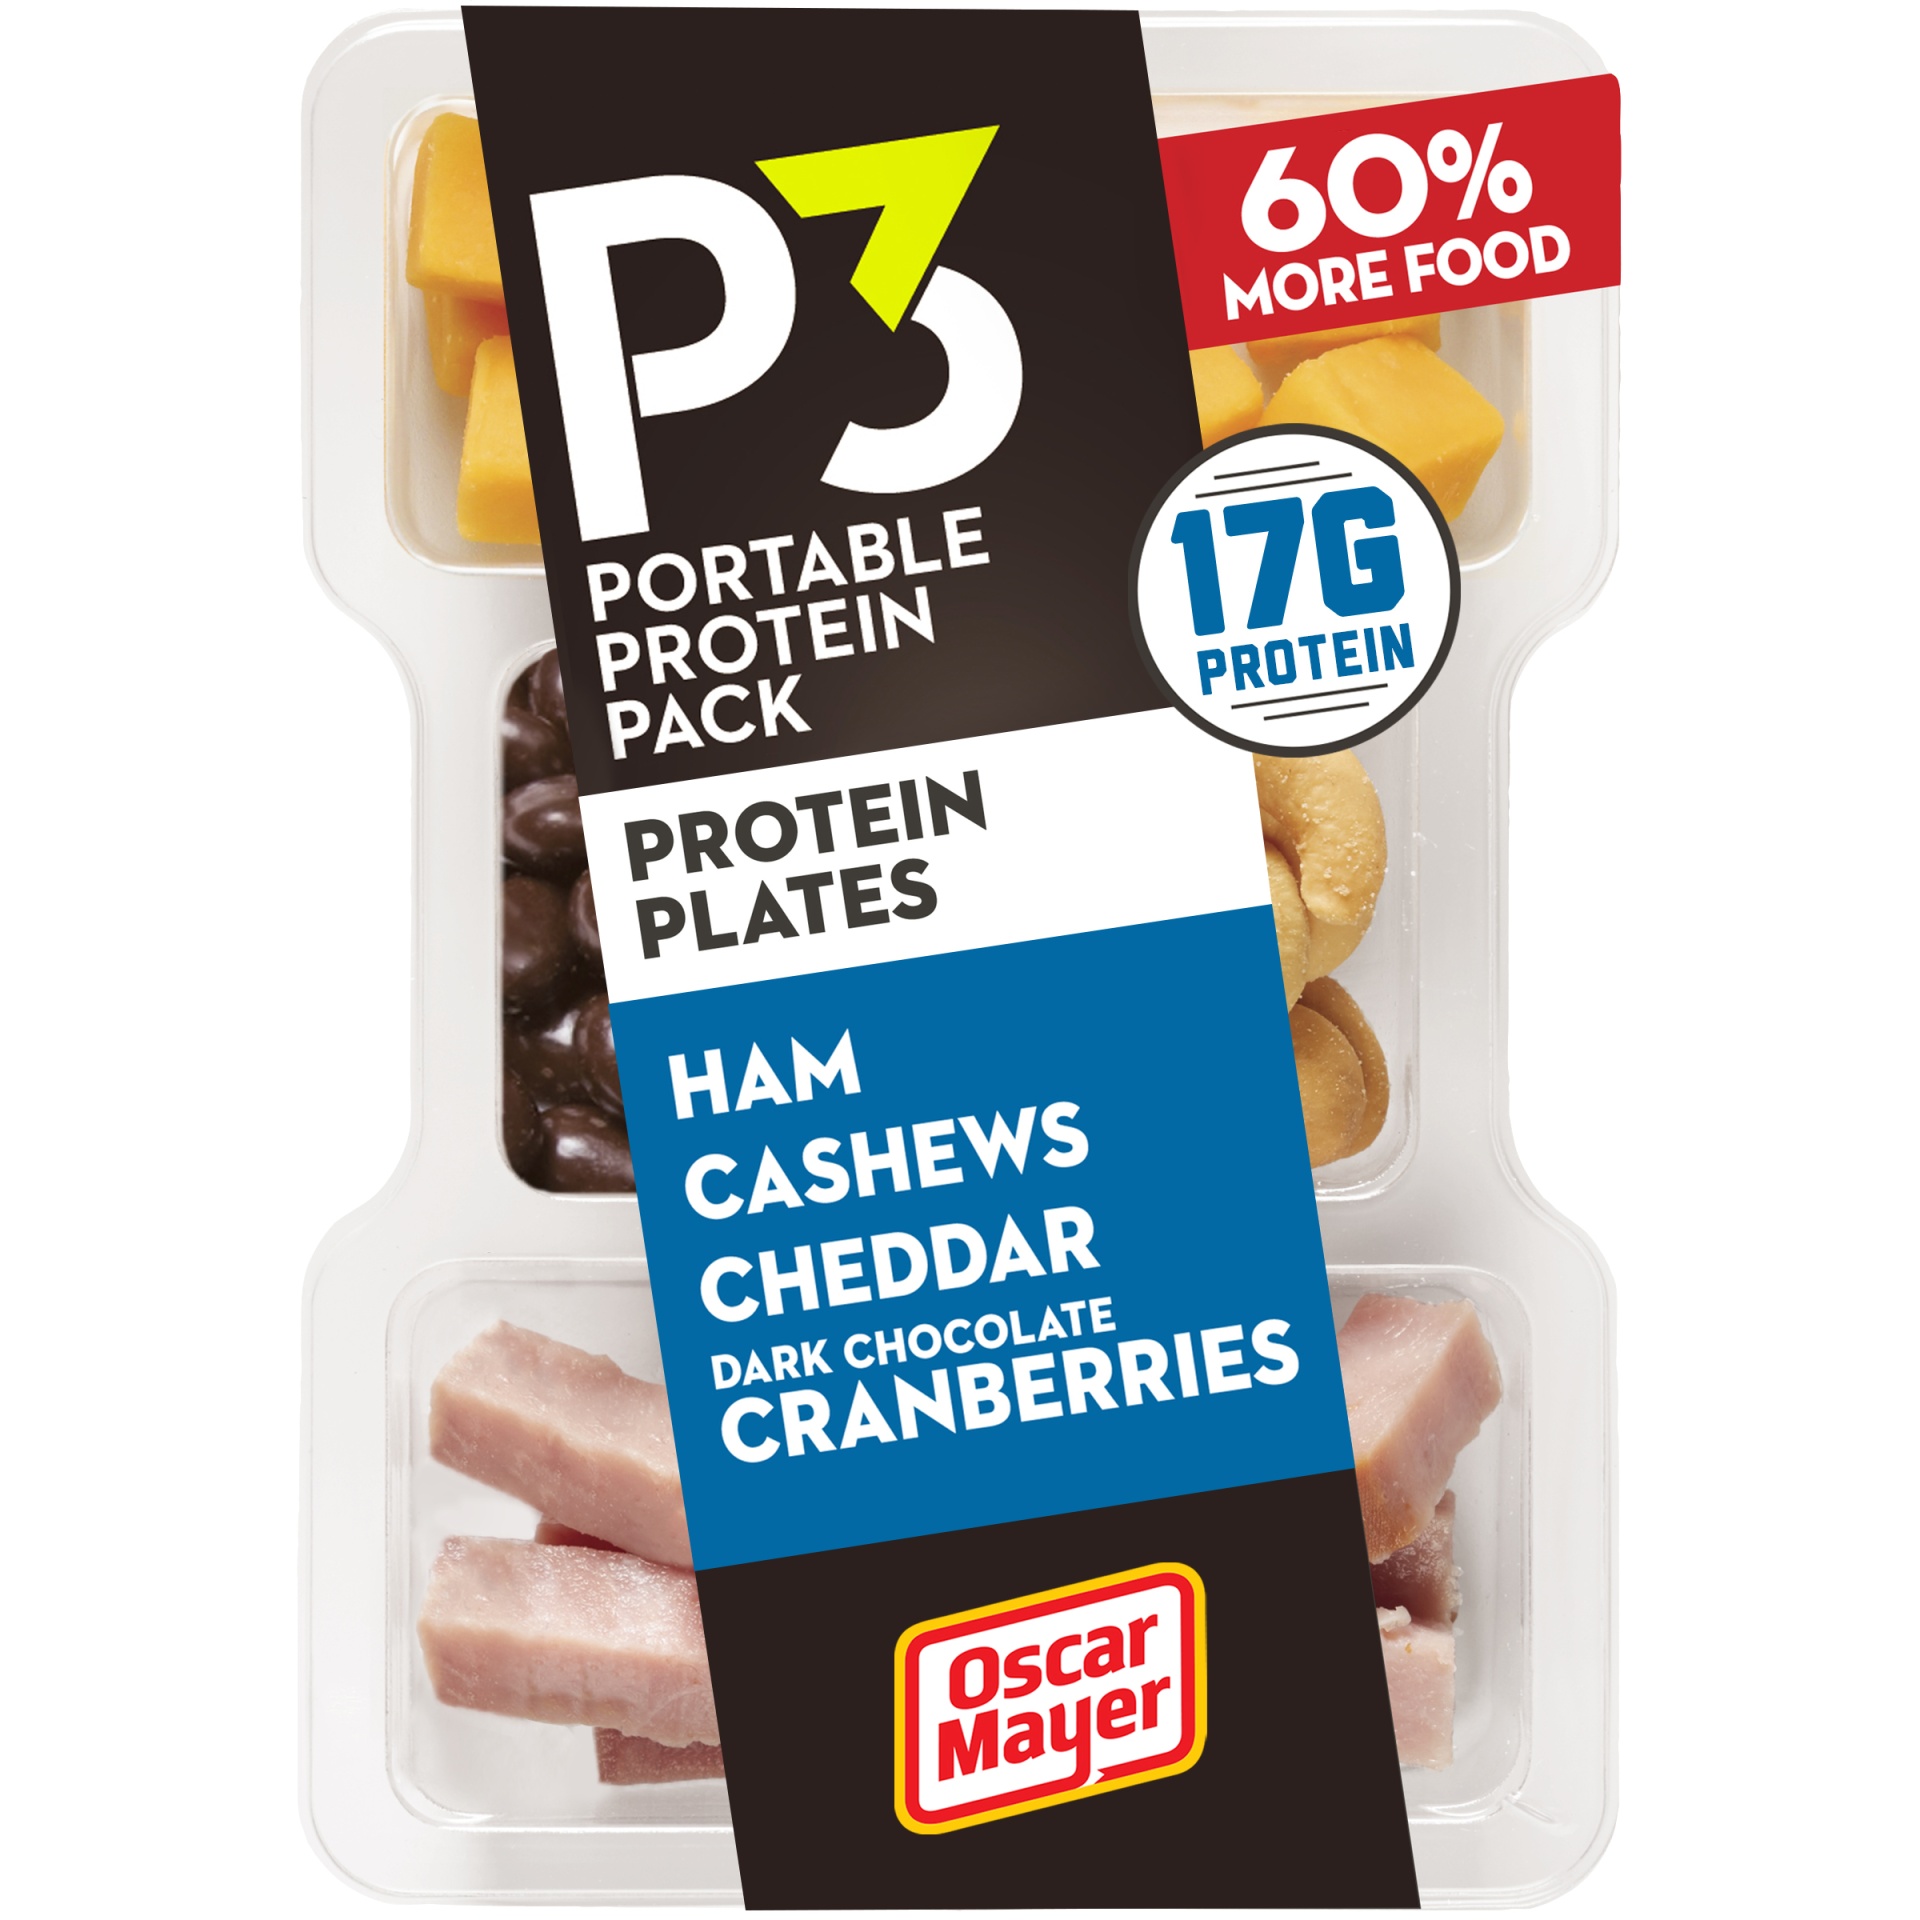 slide 1 of 6, P3 Portable Protein Snack Pack & Protein Plate with Ham, Cashews, Cheddar Cheese & Dark Chocolate Cranberries Tray, 3.2 oz